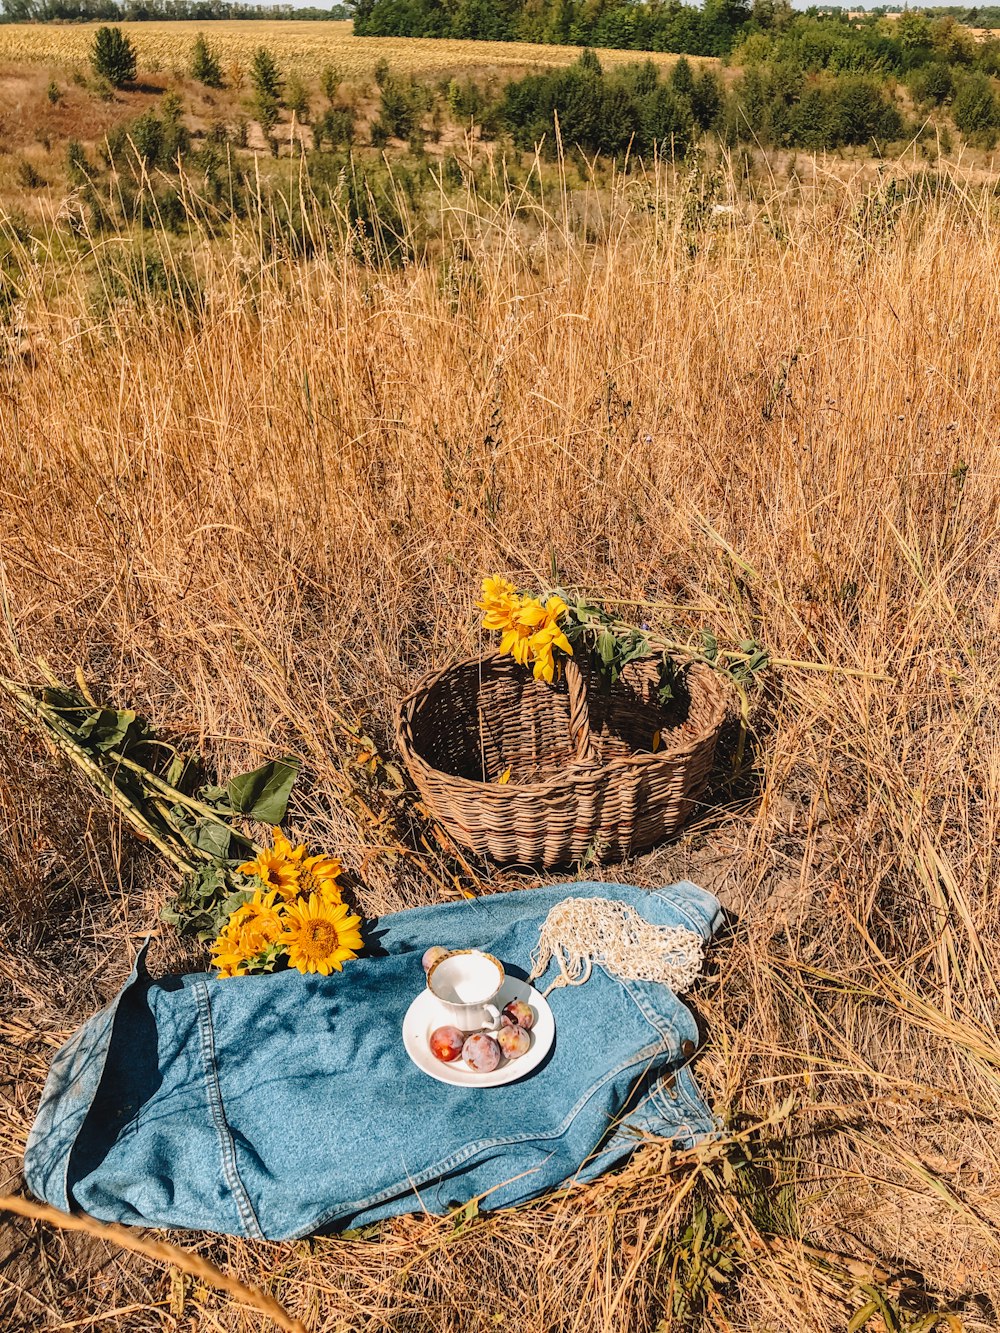 a picnic in the middle of a field with sunflowers